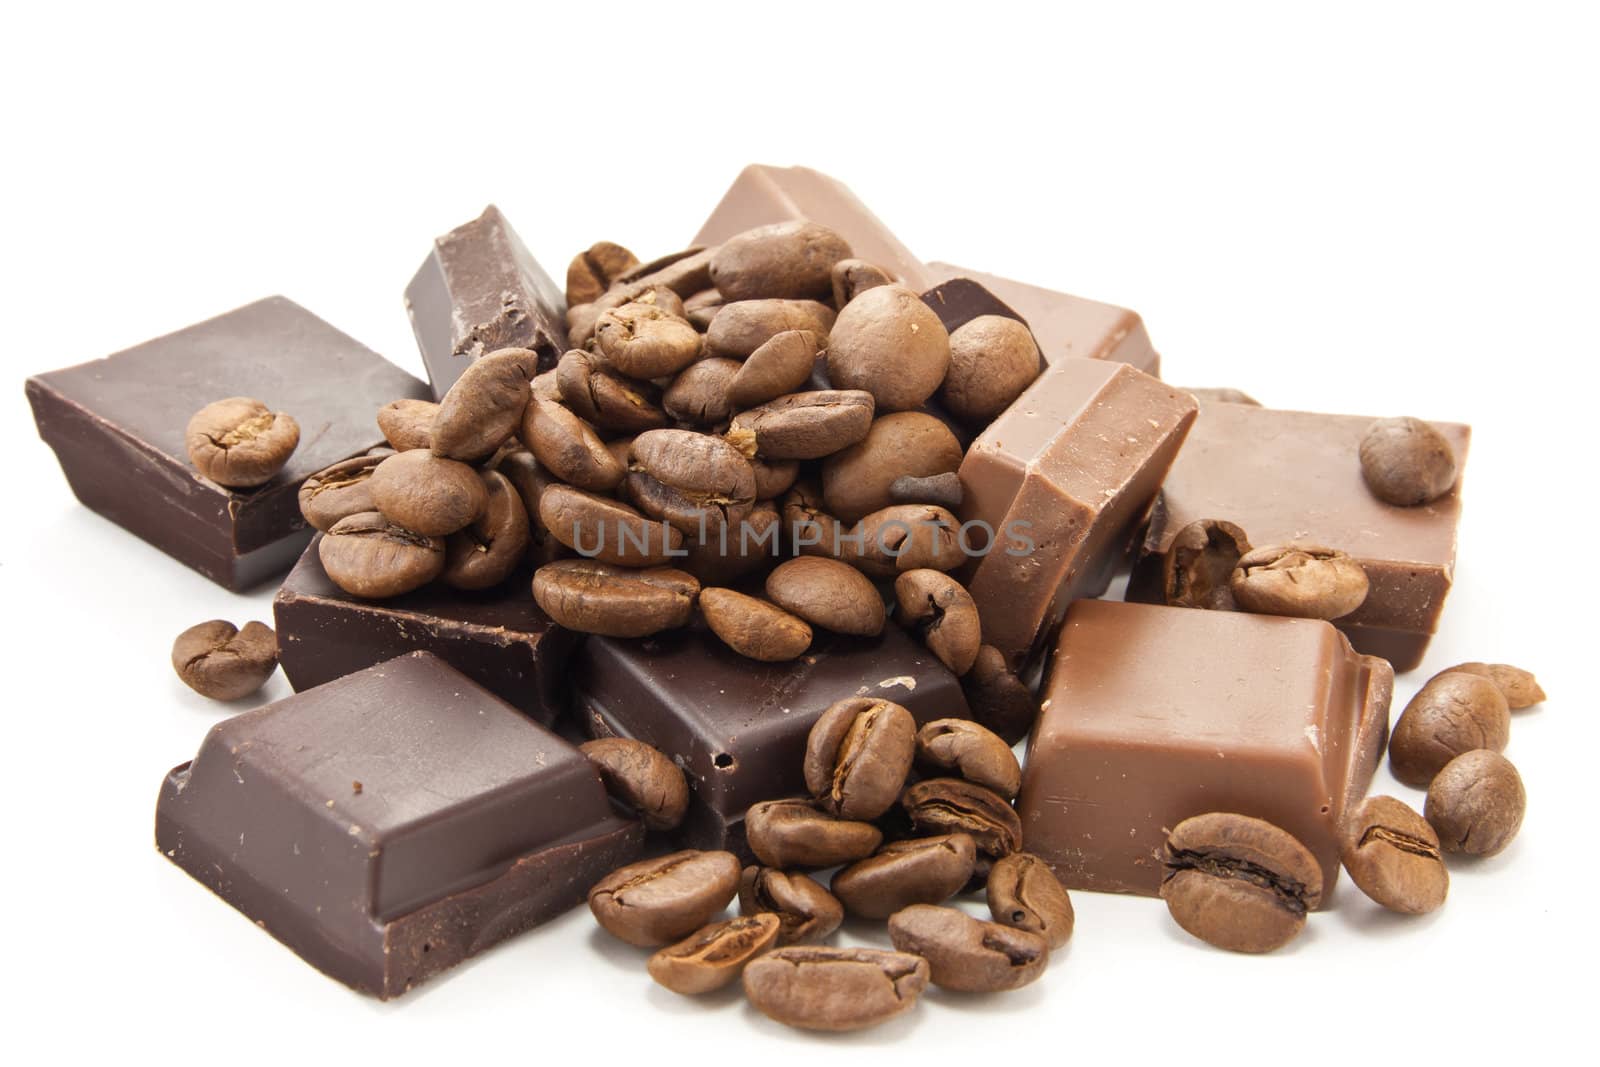 Picture of coffe beans and chocolate on a white background